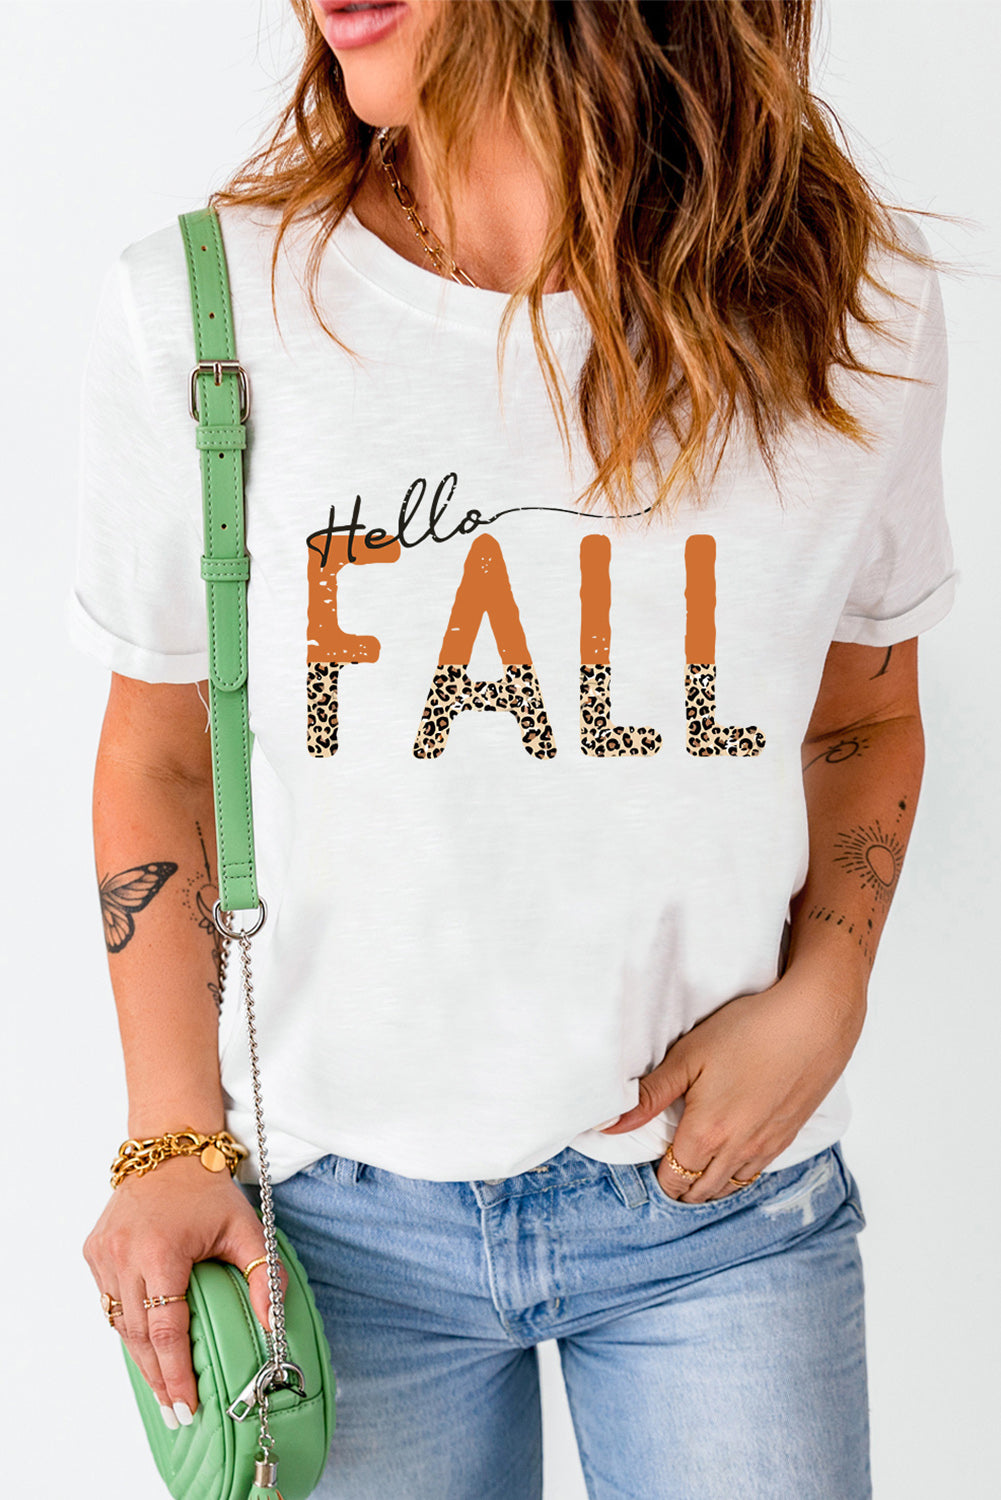 HELLO FALL Graphic Tee - The Lakeside Boutique